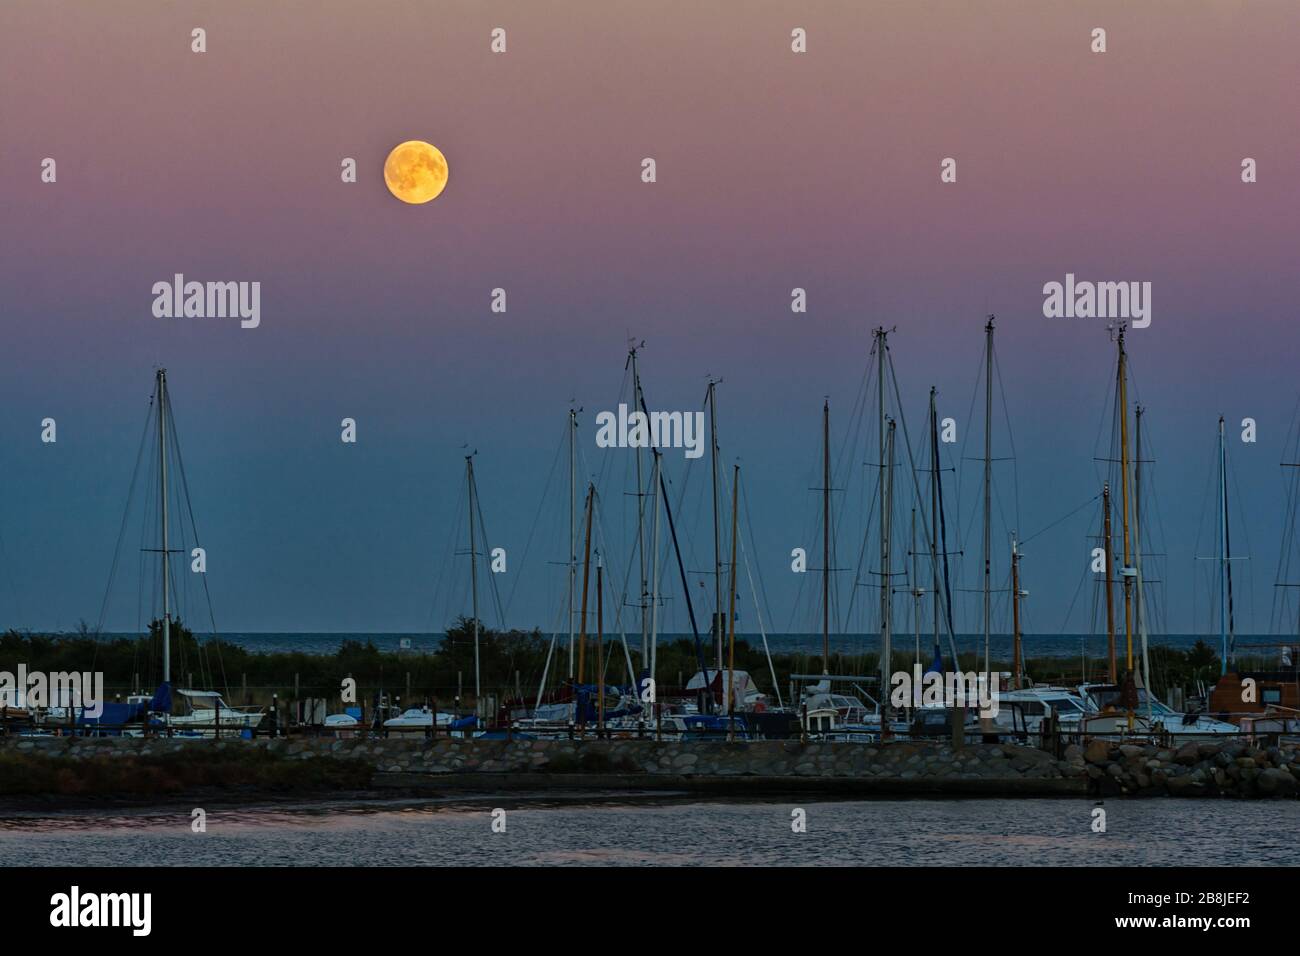 Marina Fehmarnsund on the island of Fehmarn in the Baltic Sea in the moonrise Stock Photo